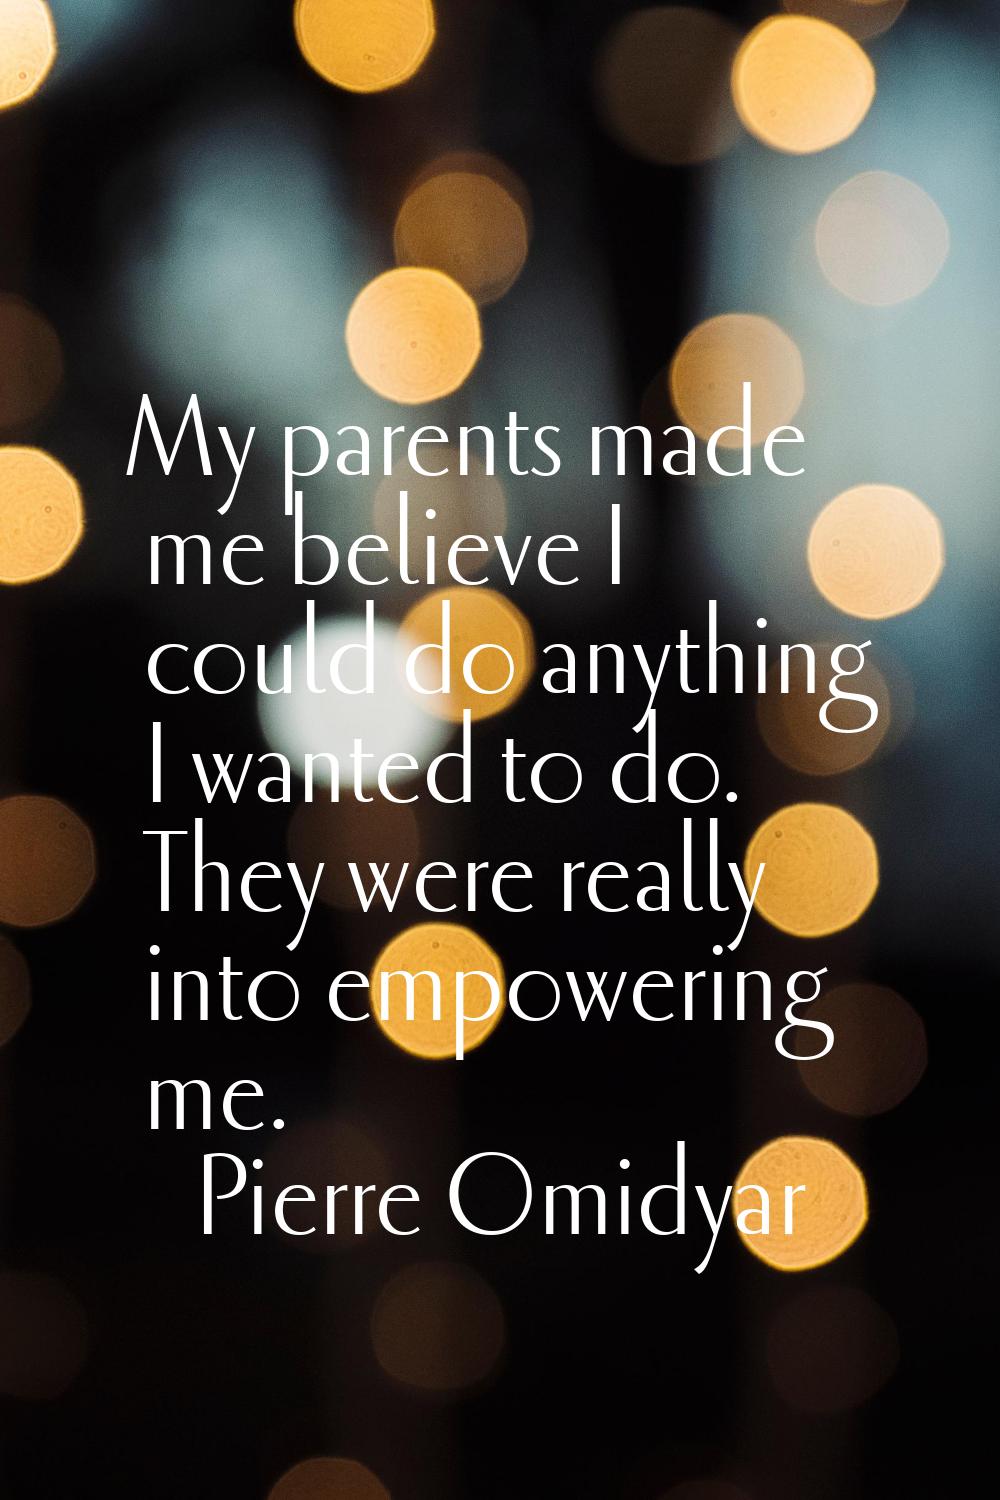 My parents made me believe I could do anything I wanted to do. They were really into empowering me.